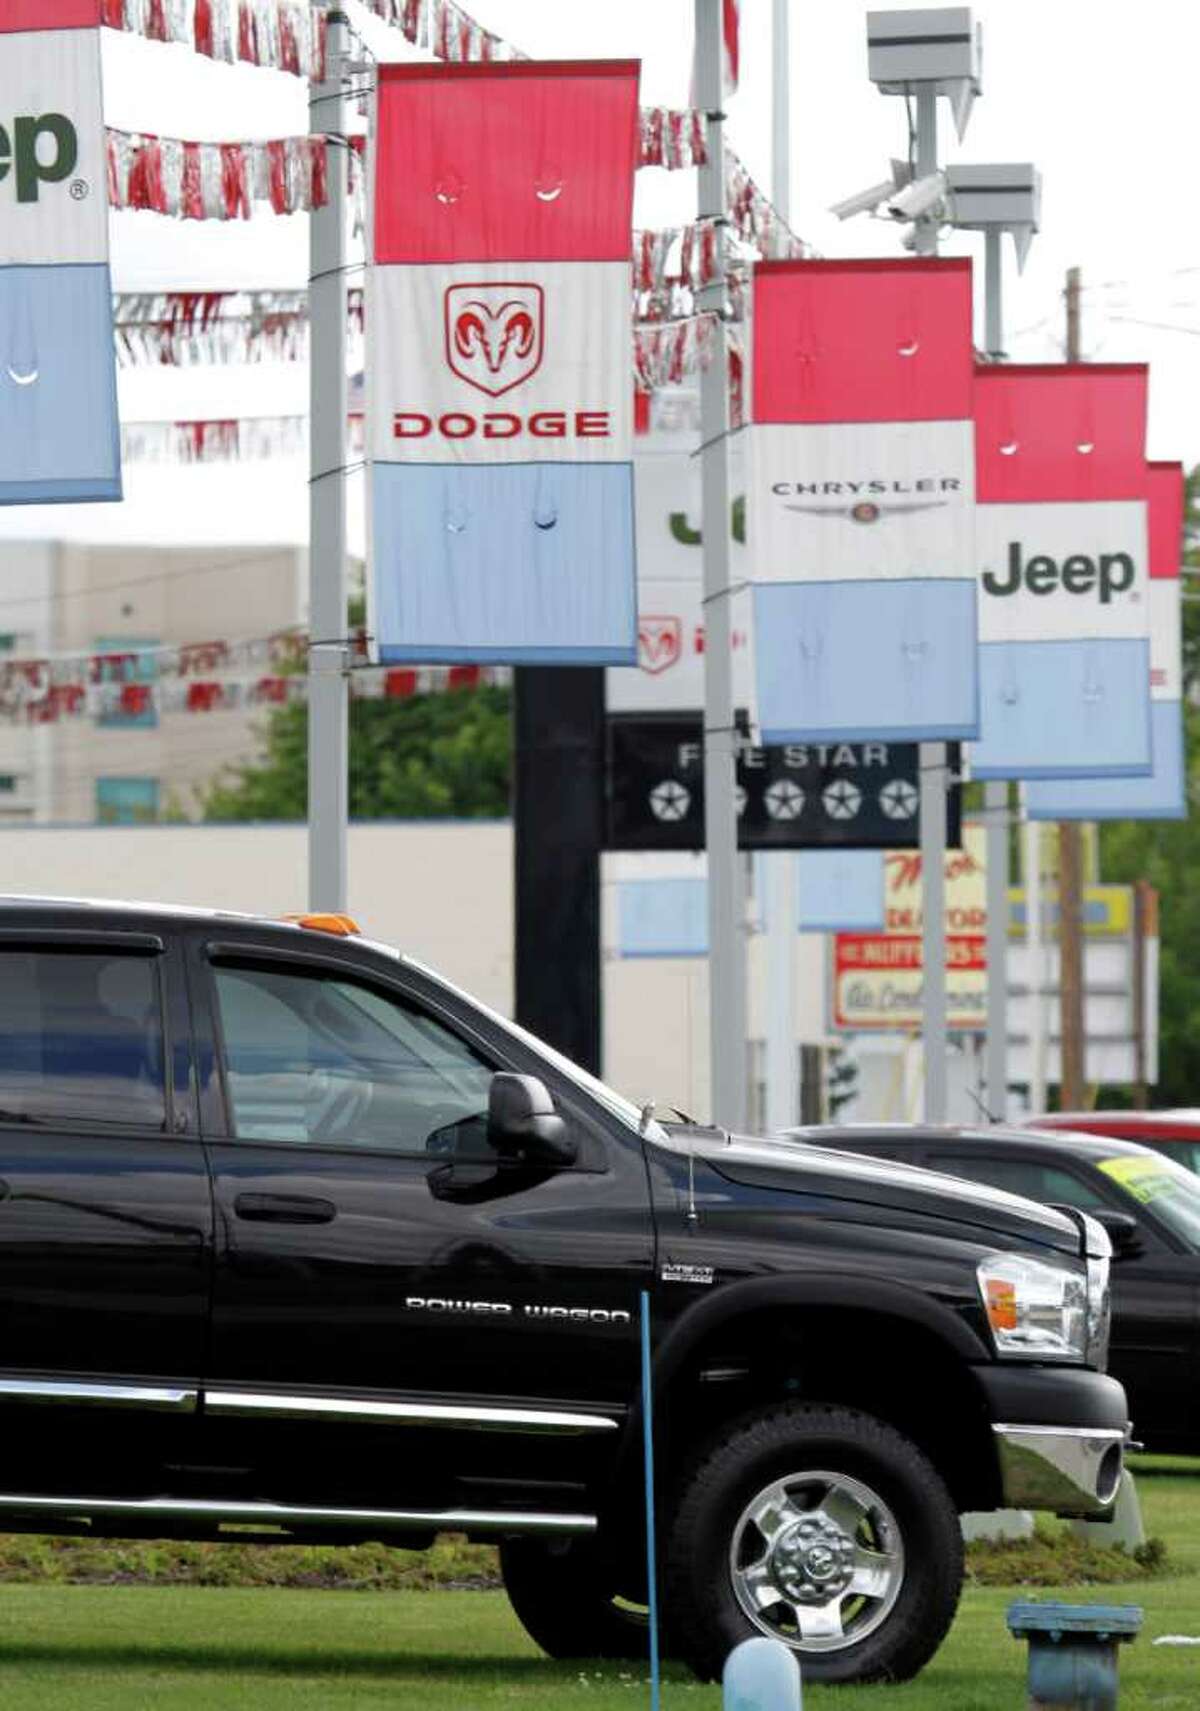 In this July 13, 2011 photo, a 2012 Dodge Power Wagon pickup truck is shown at a dealership in Hillsboro, Ore. Chrysler Group LLC said its sales rose 20 percent over last July. It was helped by new products such as the Jeep Grand Cherokee, which saw sales jump 76 percent. (AP Photo/Don Ryan)